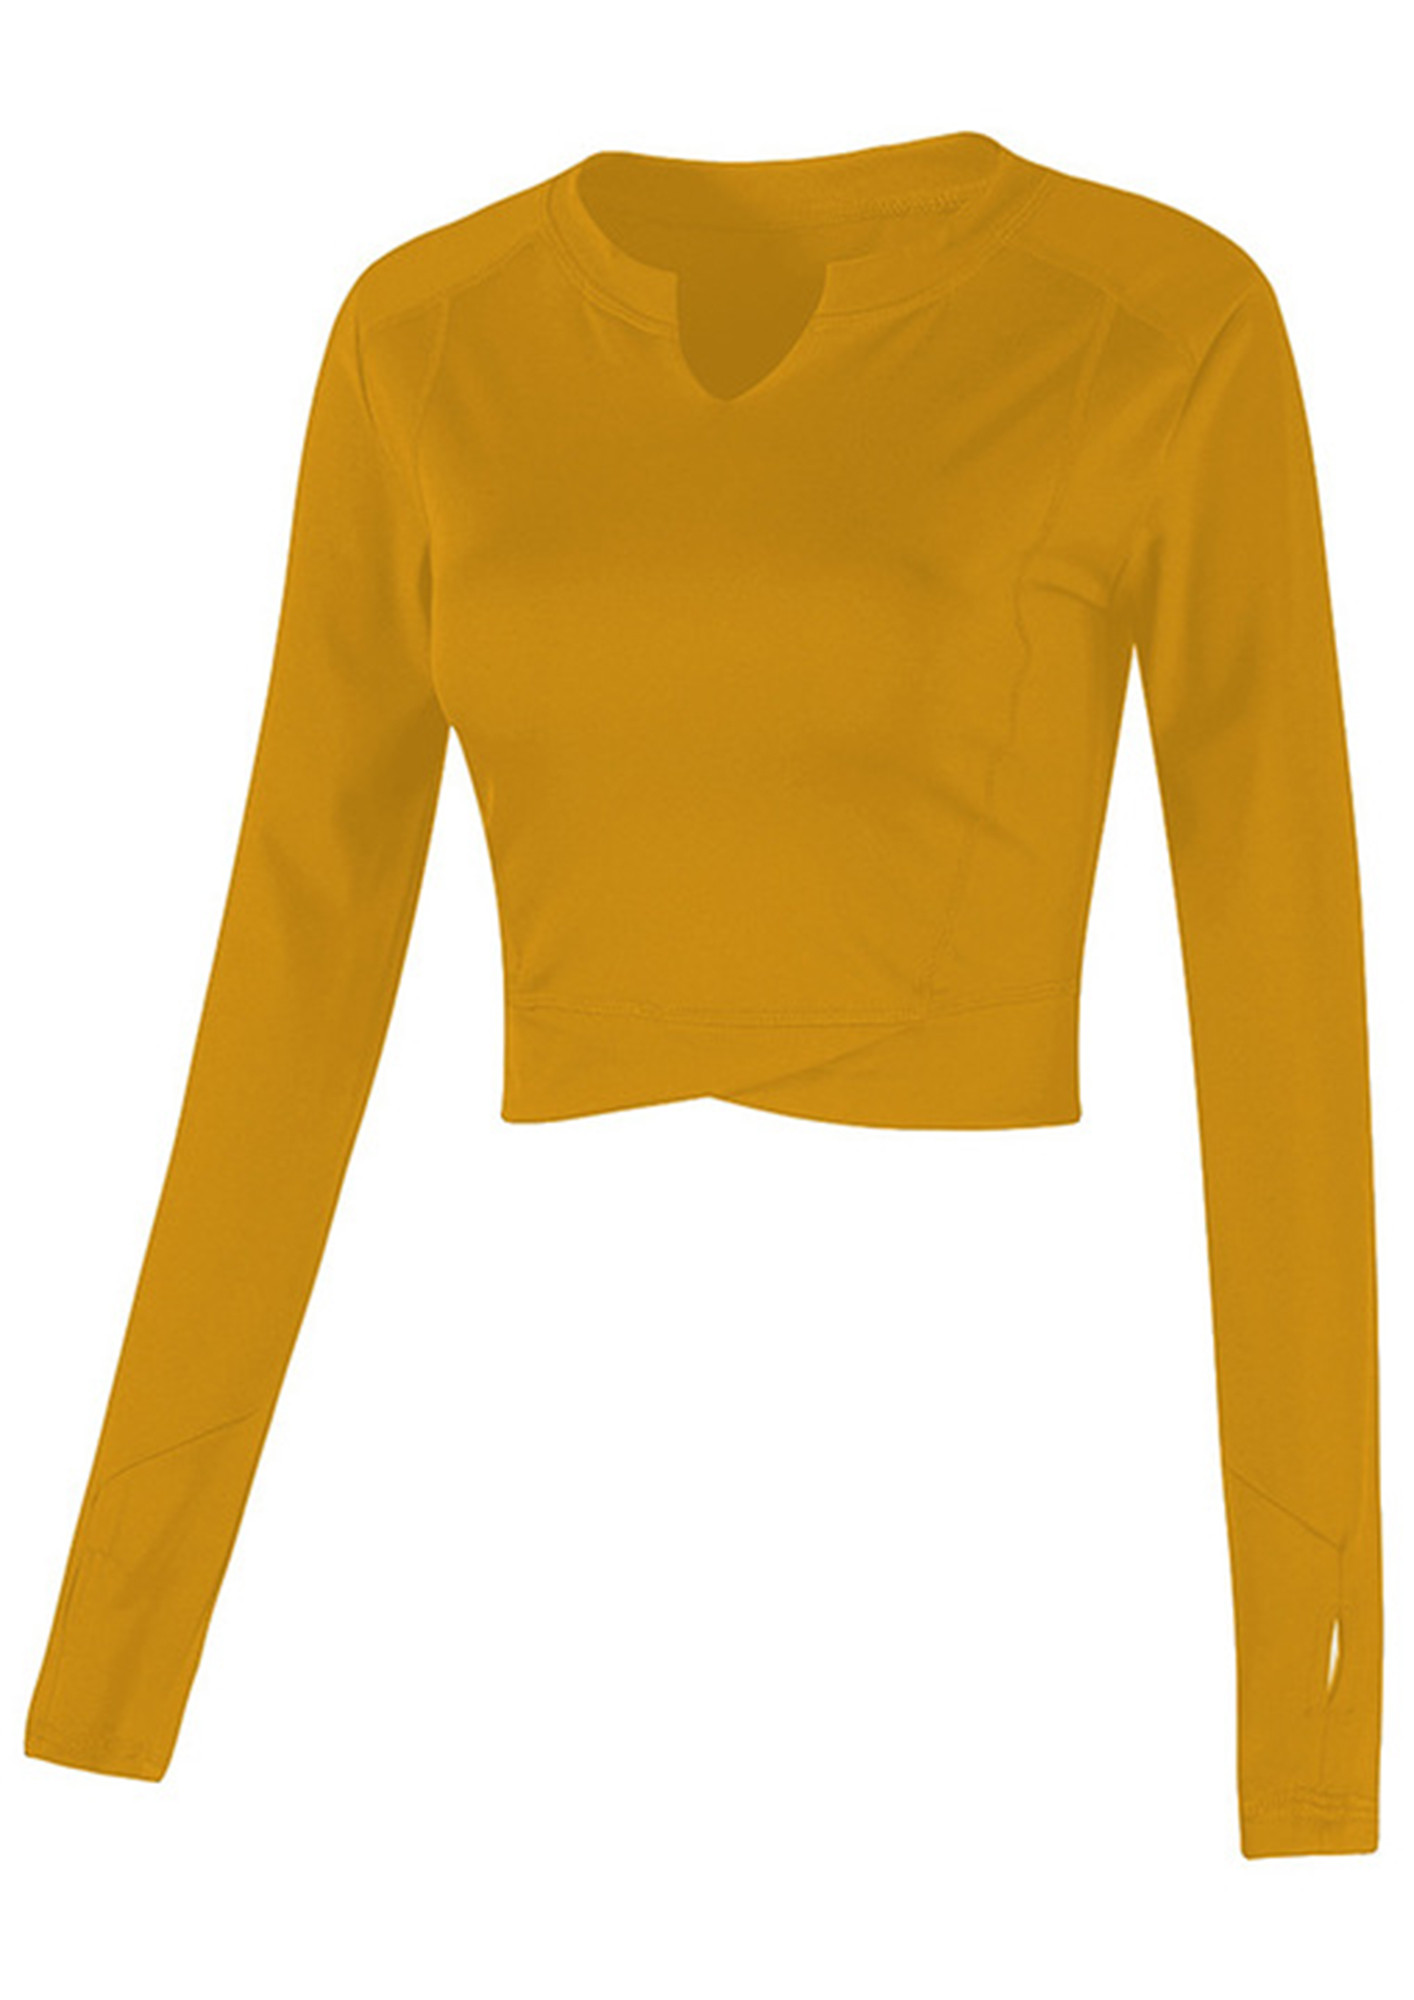 TAKE YOUR TIME WITH FITNESS YELLOW SPORTS TOP